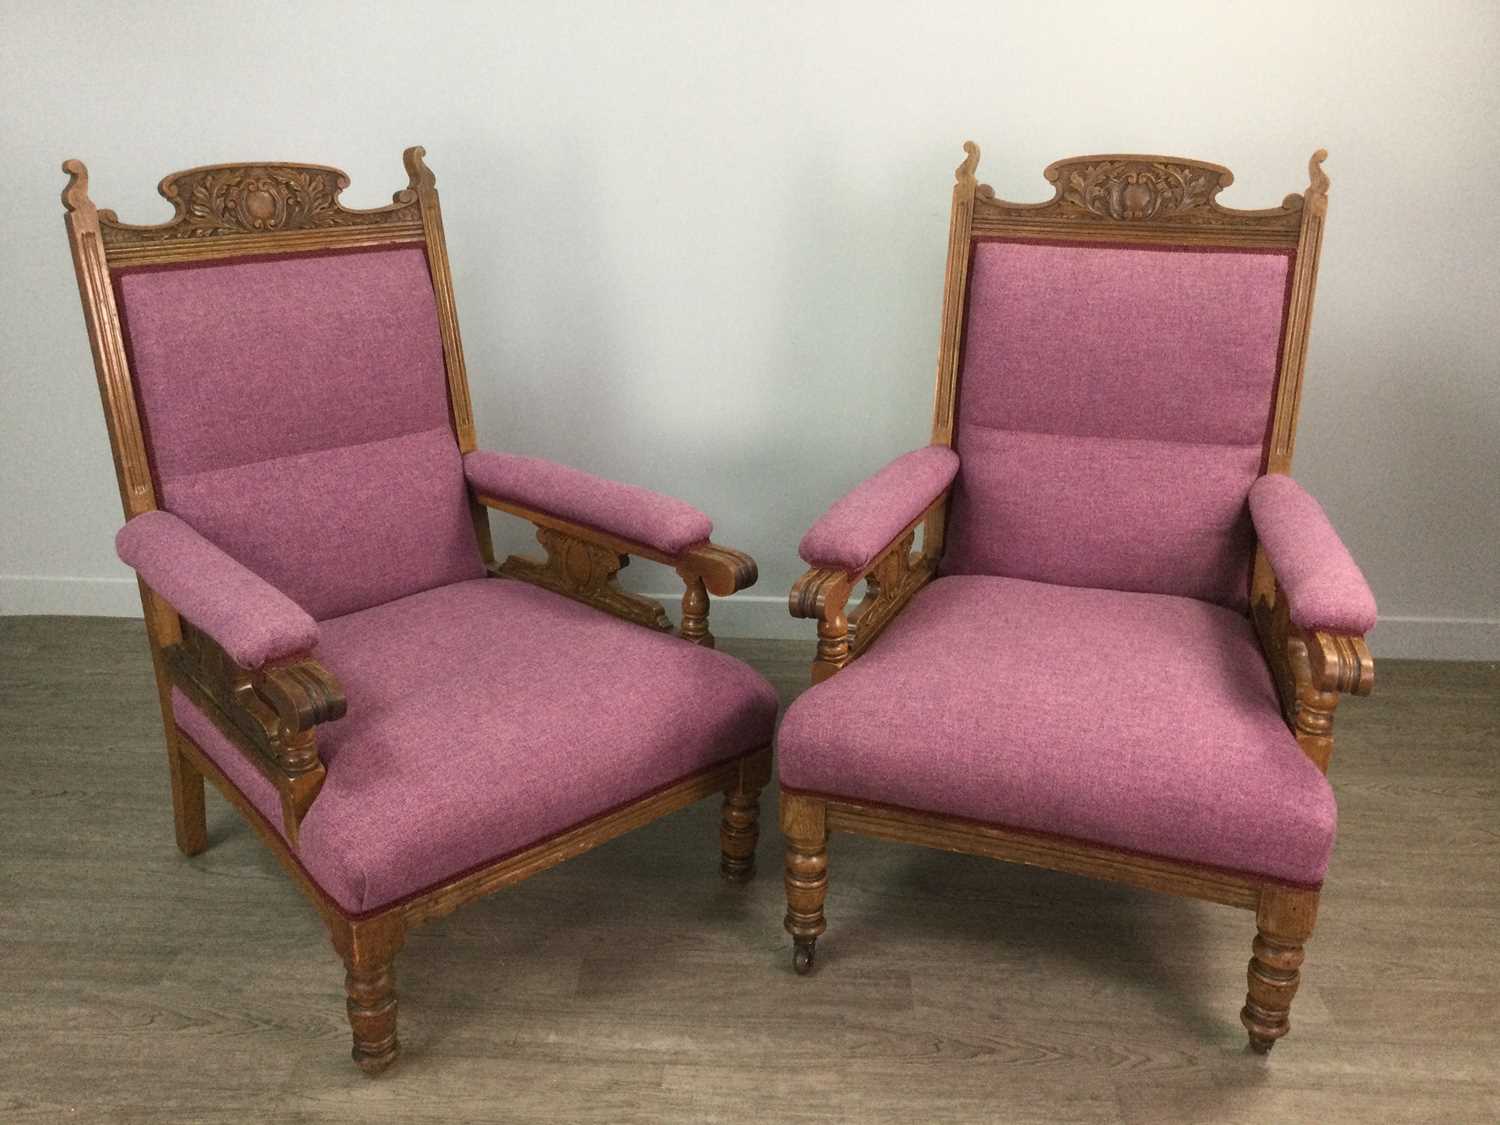 Lot 1644 - A PAIR OF LATE 19TH CENTURY OAK FRAMED ARMCHAIRS